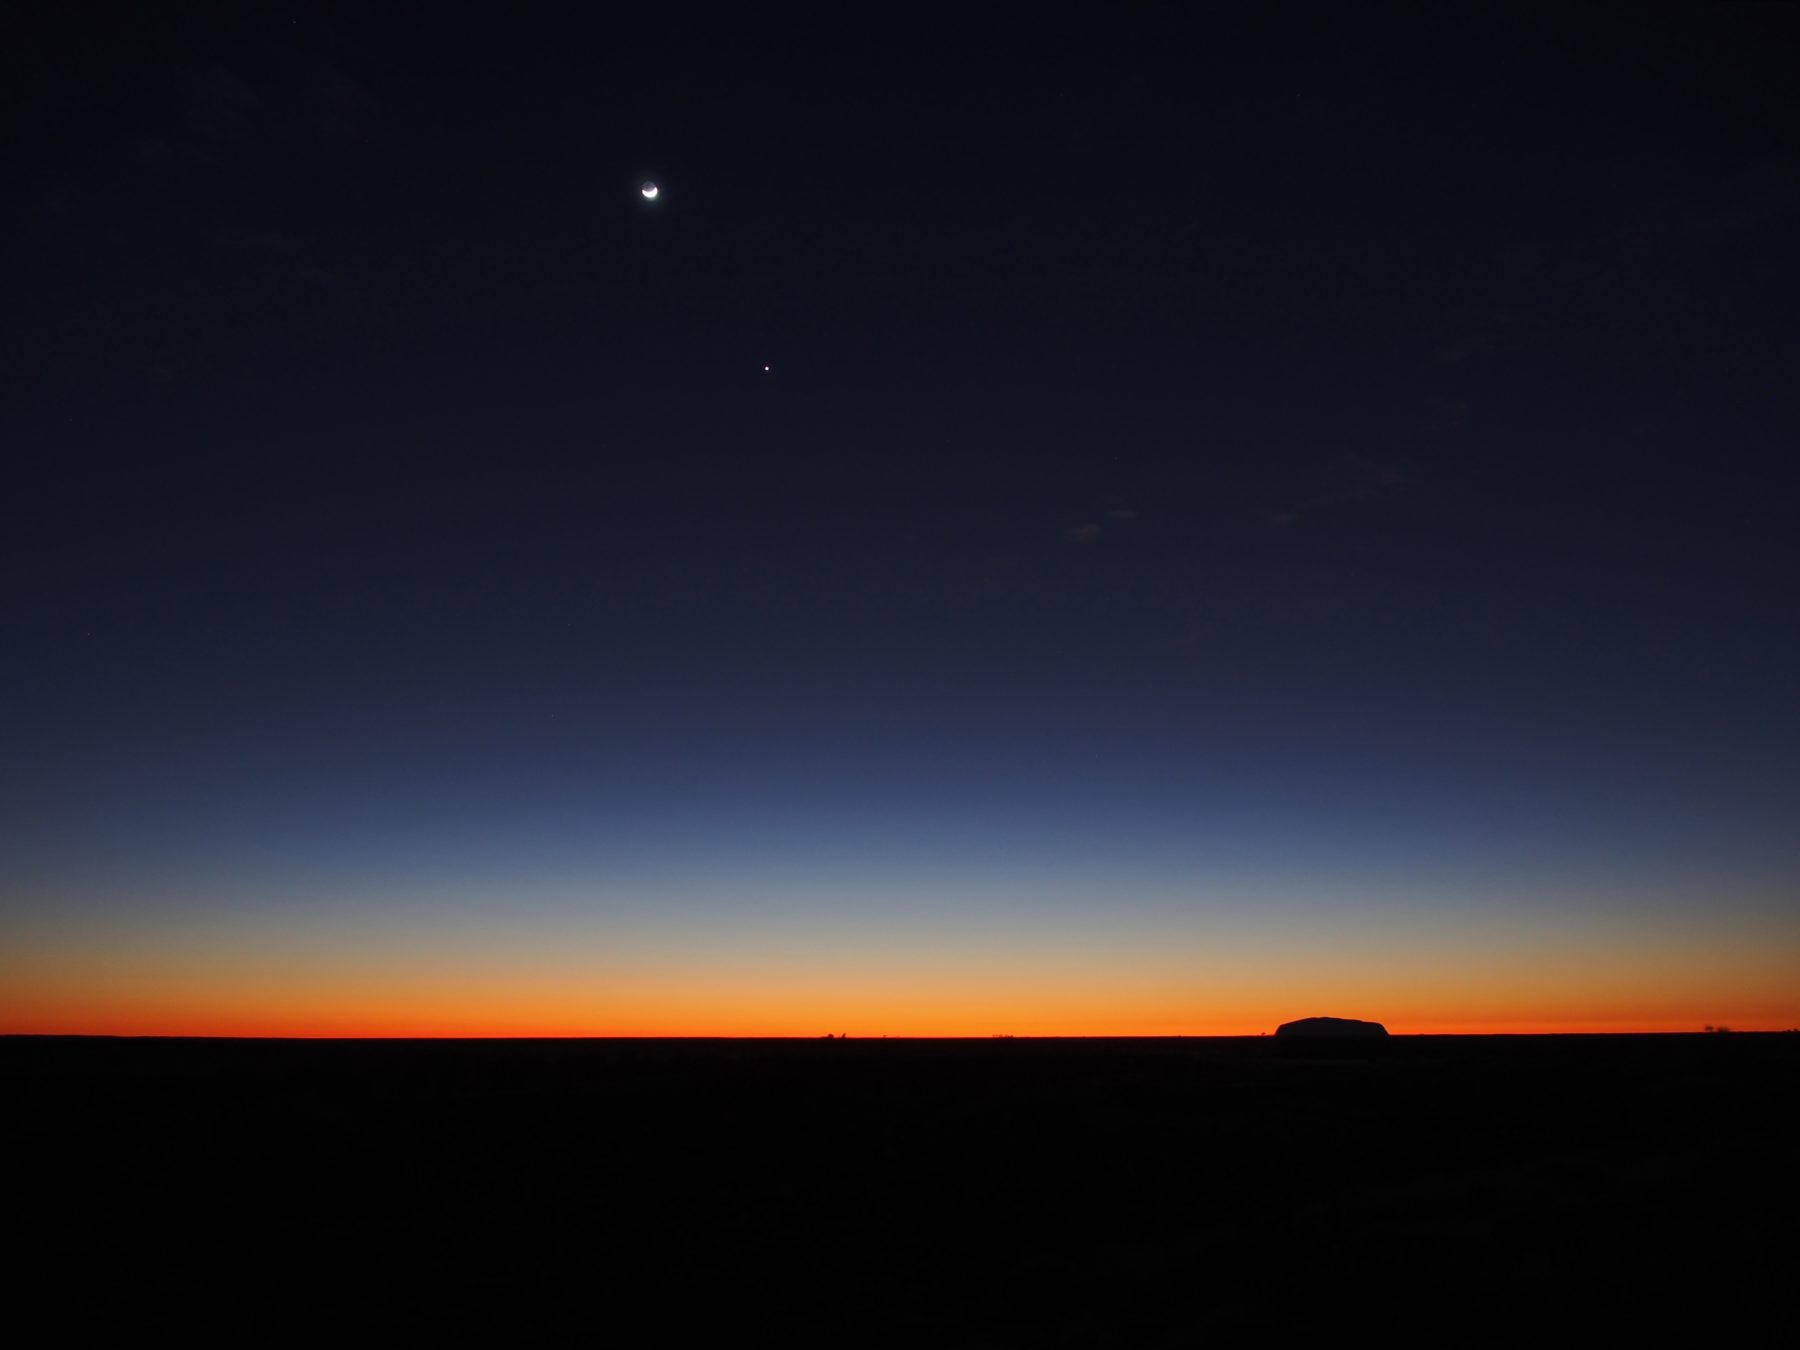 A twilight image of Uluru and the surrounding landscape with the moon and stars in the sky.